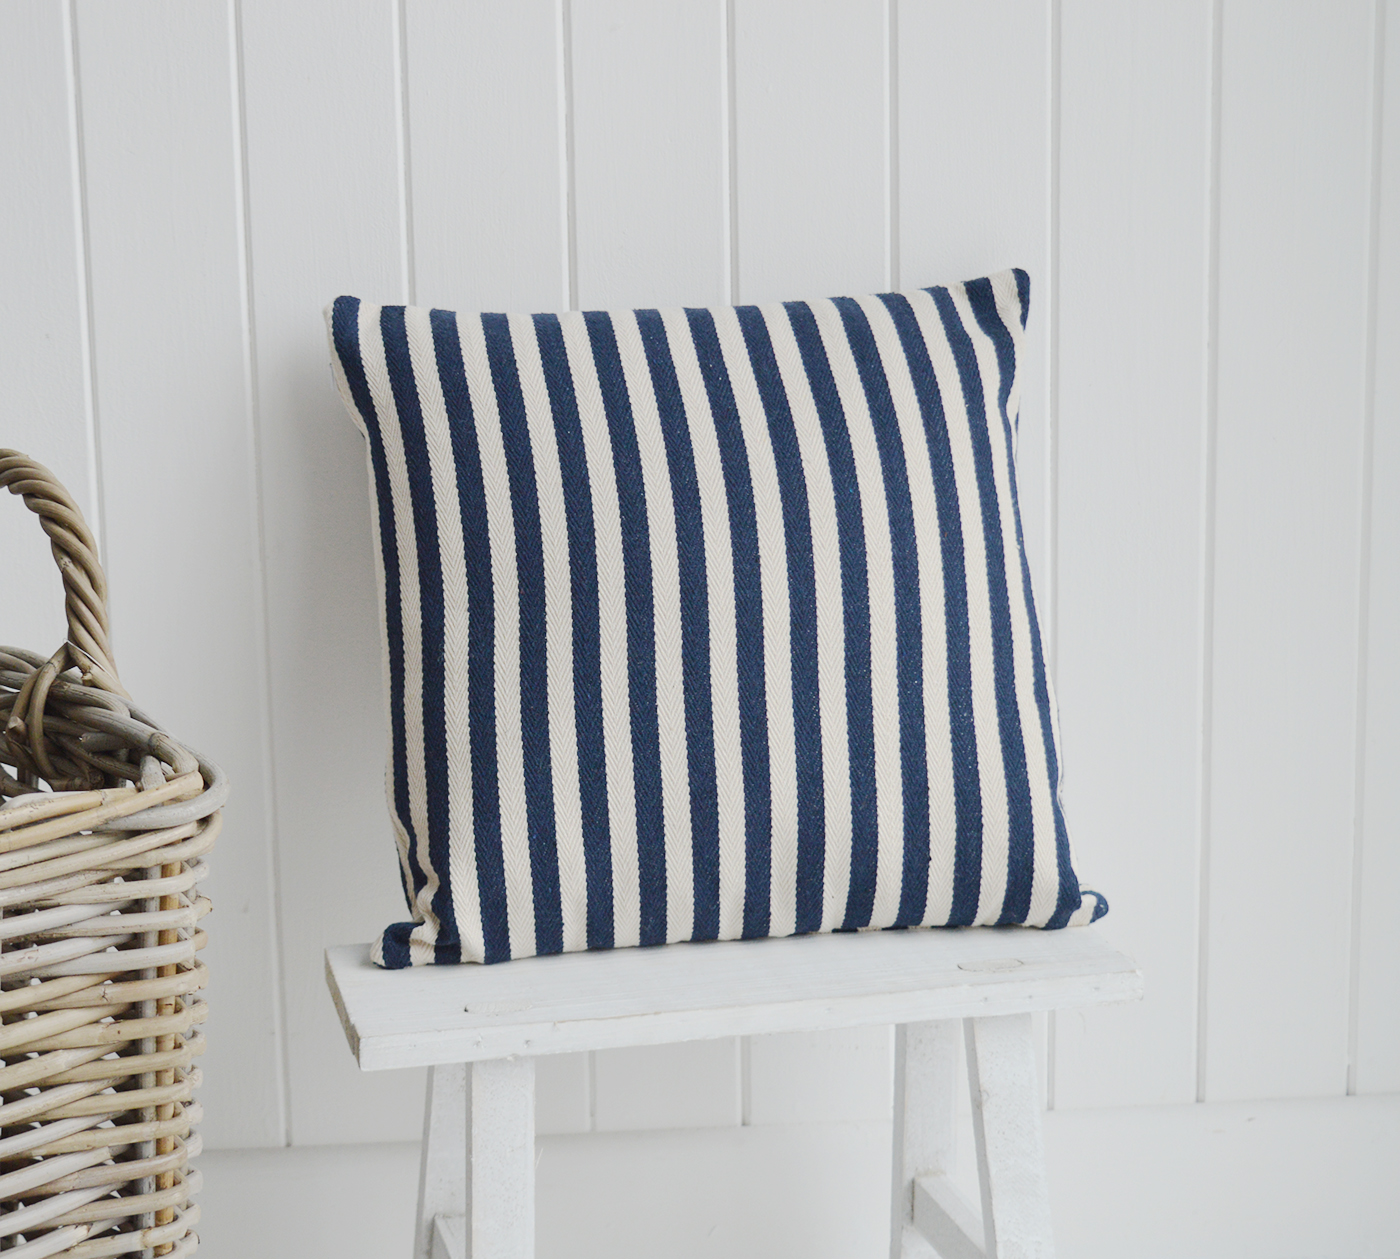 The White Lighthouse. New England Style Country, Coastal and White Furniture and accessories for the home. New England cushions and soft furnishing - Harrison Navy Blue and White Stripe Cushion